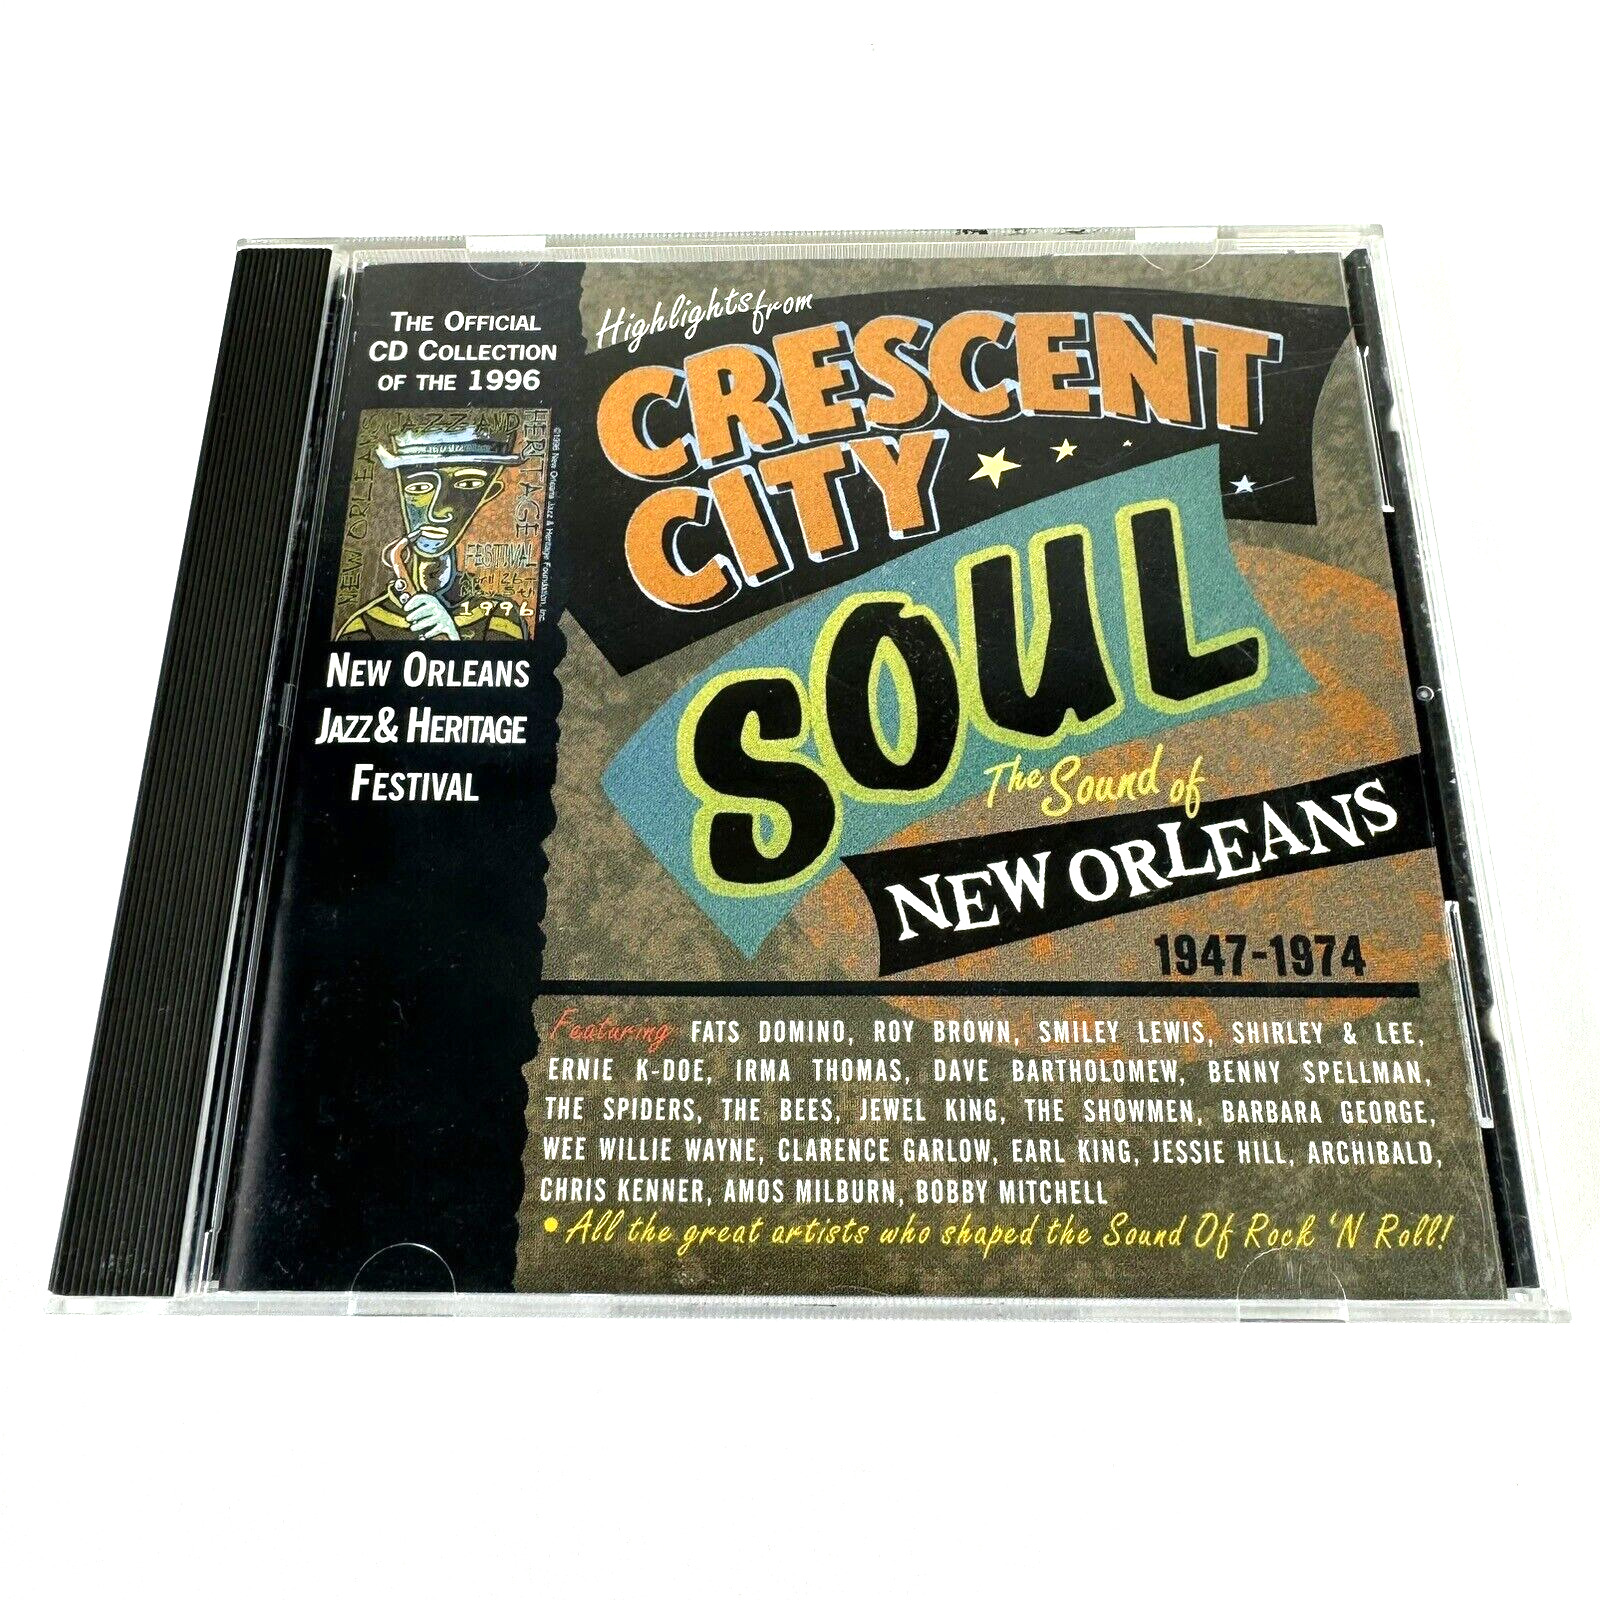 Highlights from Crescent City Soul: The Sound of New Orleans 1947-1974 Music CD